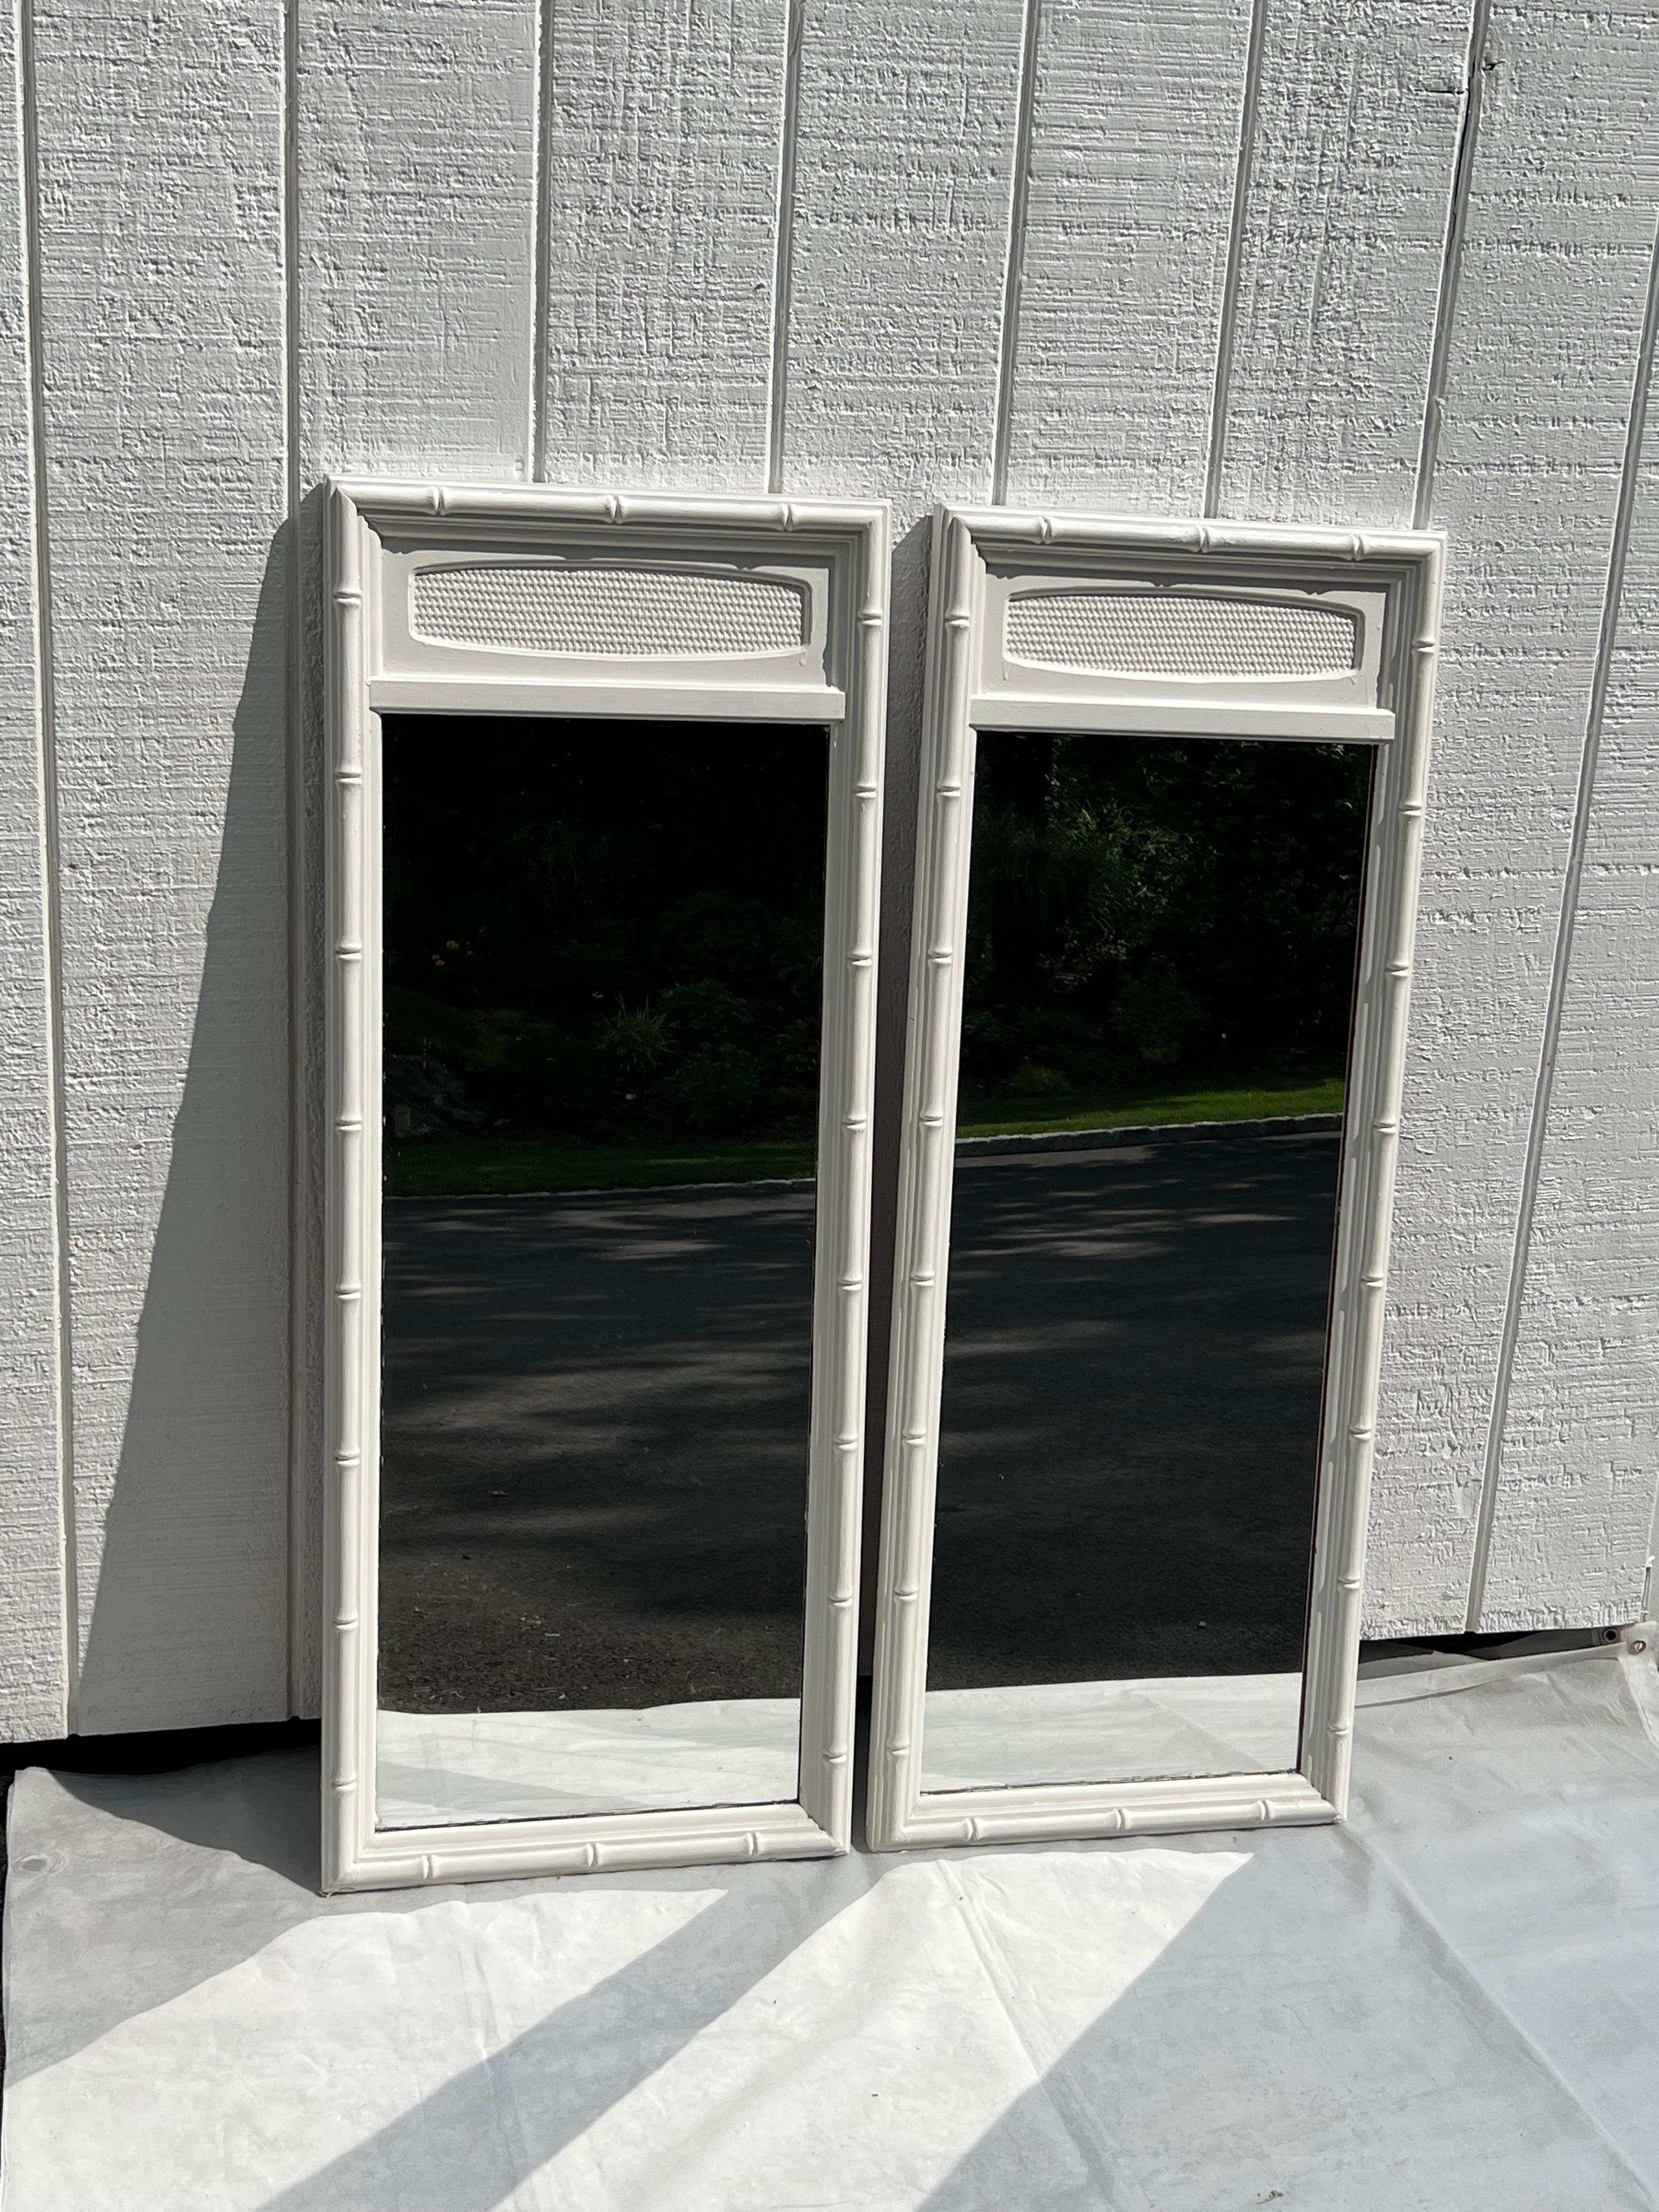 Pair of White Thomasville Faux Bamboo Mirrors. Classic tall and narrow mirrors with bamboo accent and white wicker. Perfect for over a double vanity or powder rooms. 
Orignally was over a large wide Thomasville dresser.  Sold as a pair. Can possibly